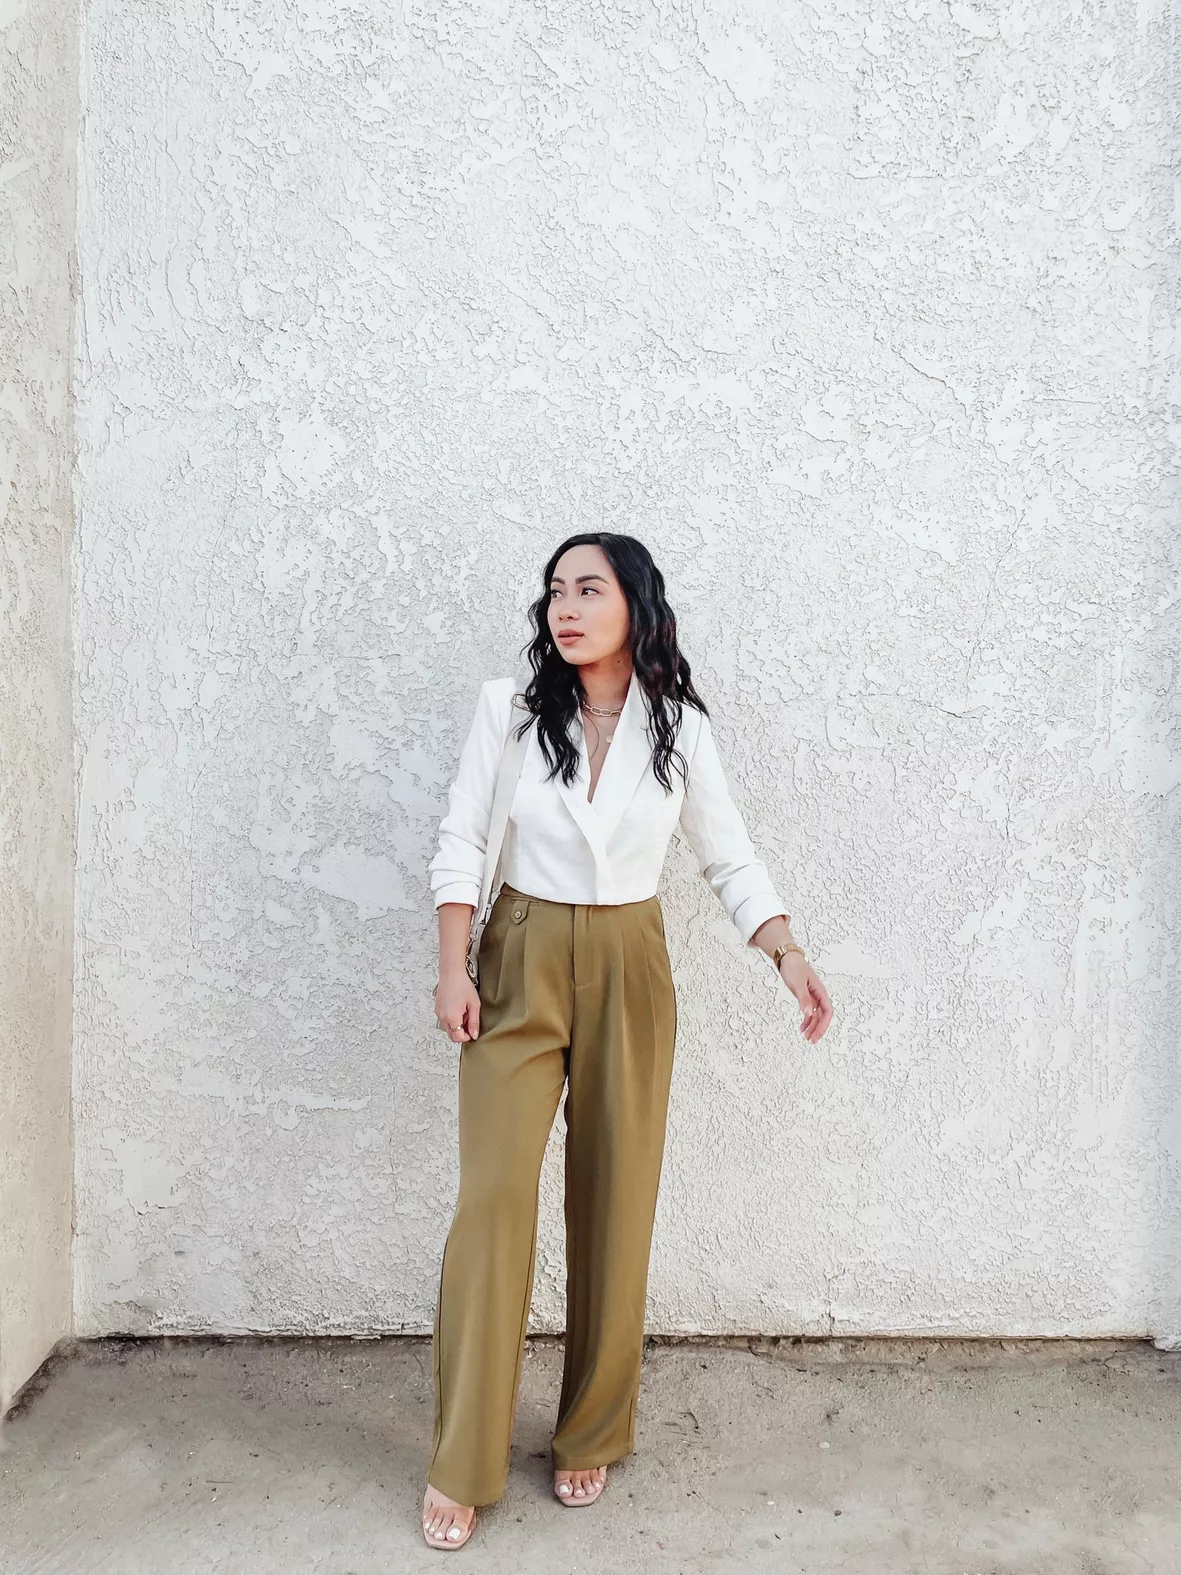 Crop Pants for Petites  The Budget Fashionista